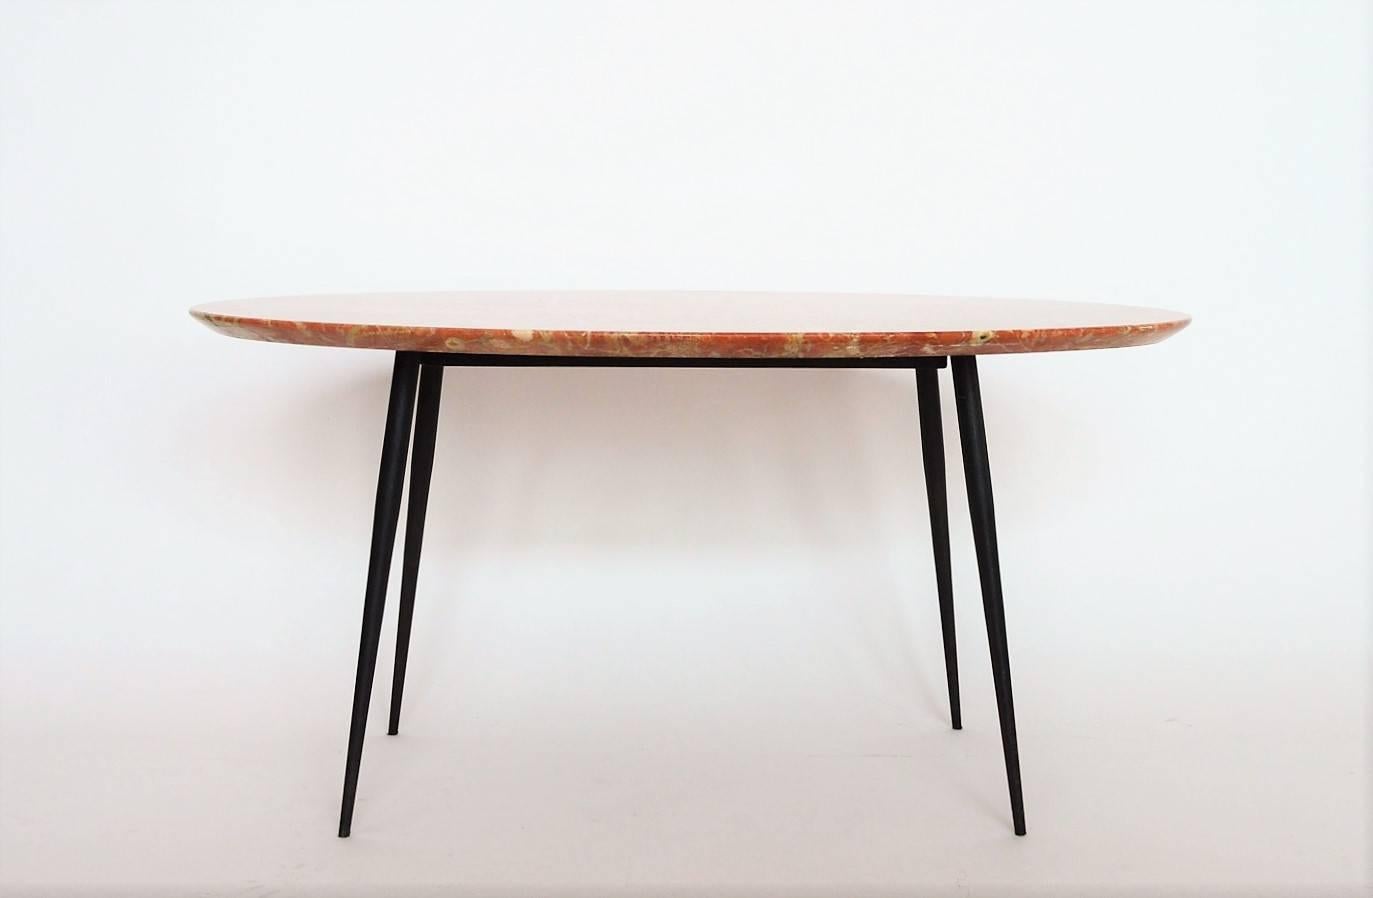 Polished Mid-Century Italian Red Marble Coffee or Side Table, 1950s